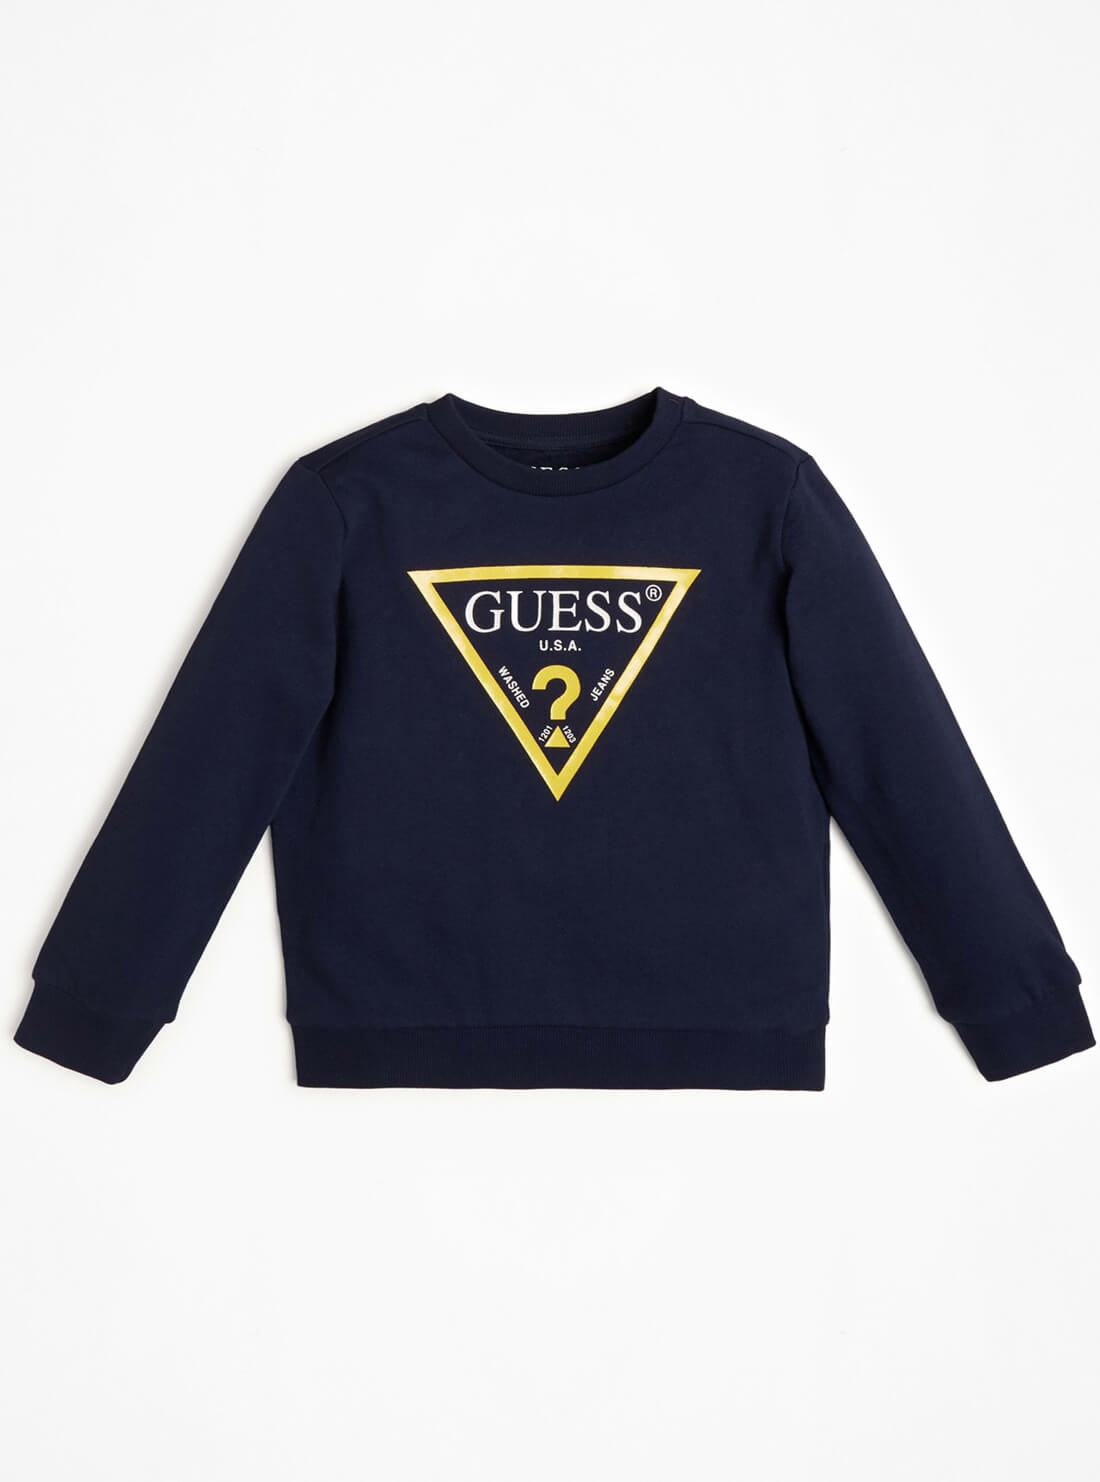 GUESS Big Boys Navy Blue Long Sleeve Fleece Pullover Top (7-16) N73Q10K5WK0 Front View